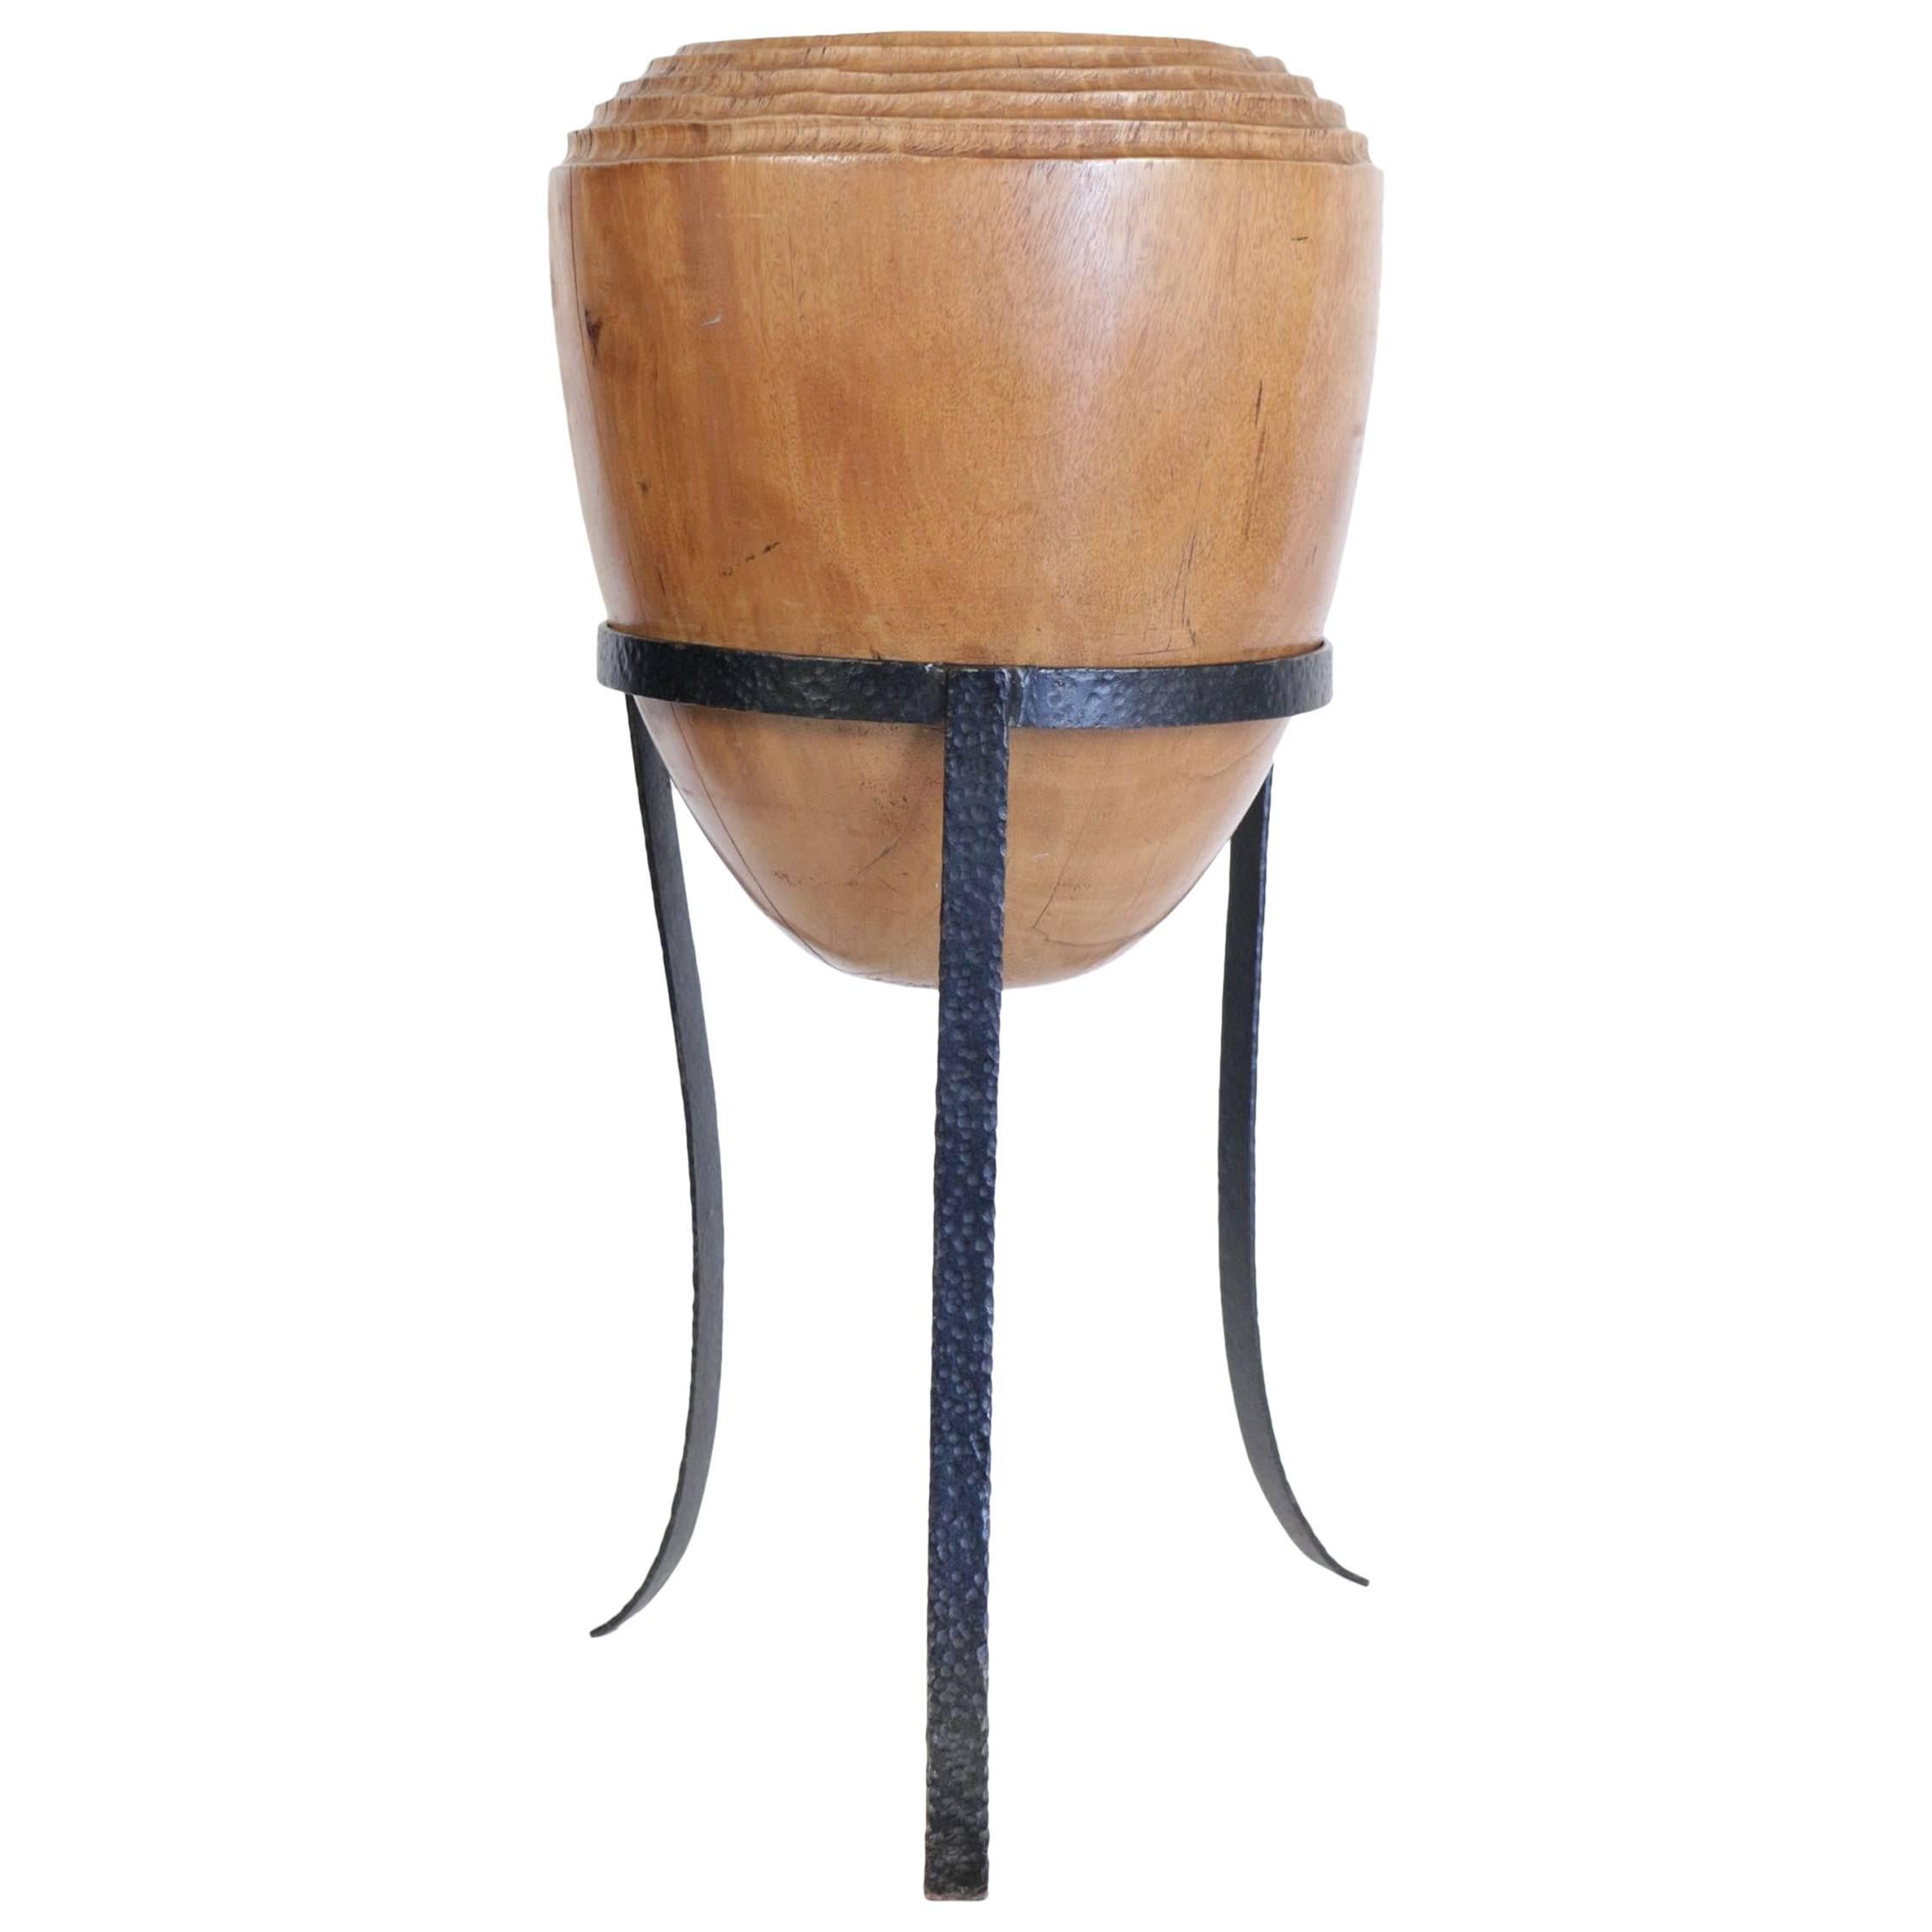 Large Mid-Century Modern Decorative Pot in Solid Wood in the Form of an Olive